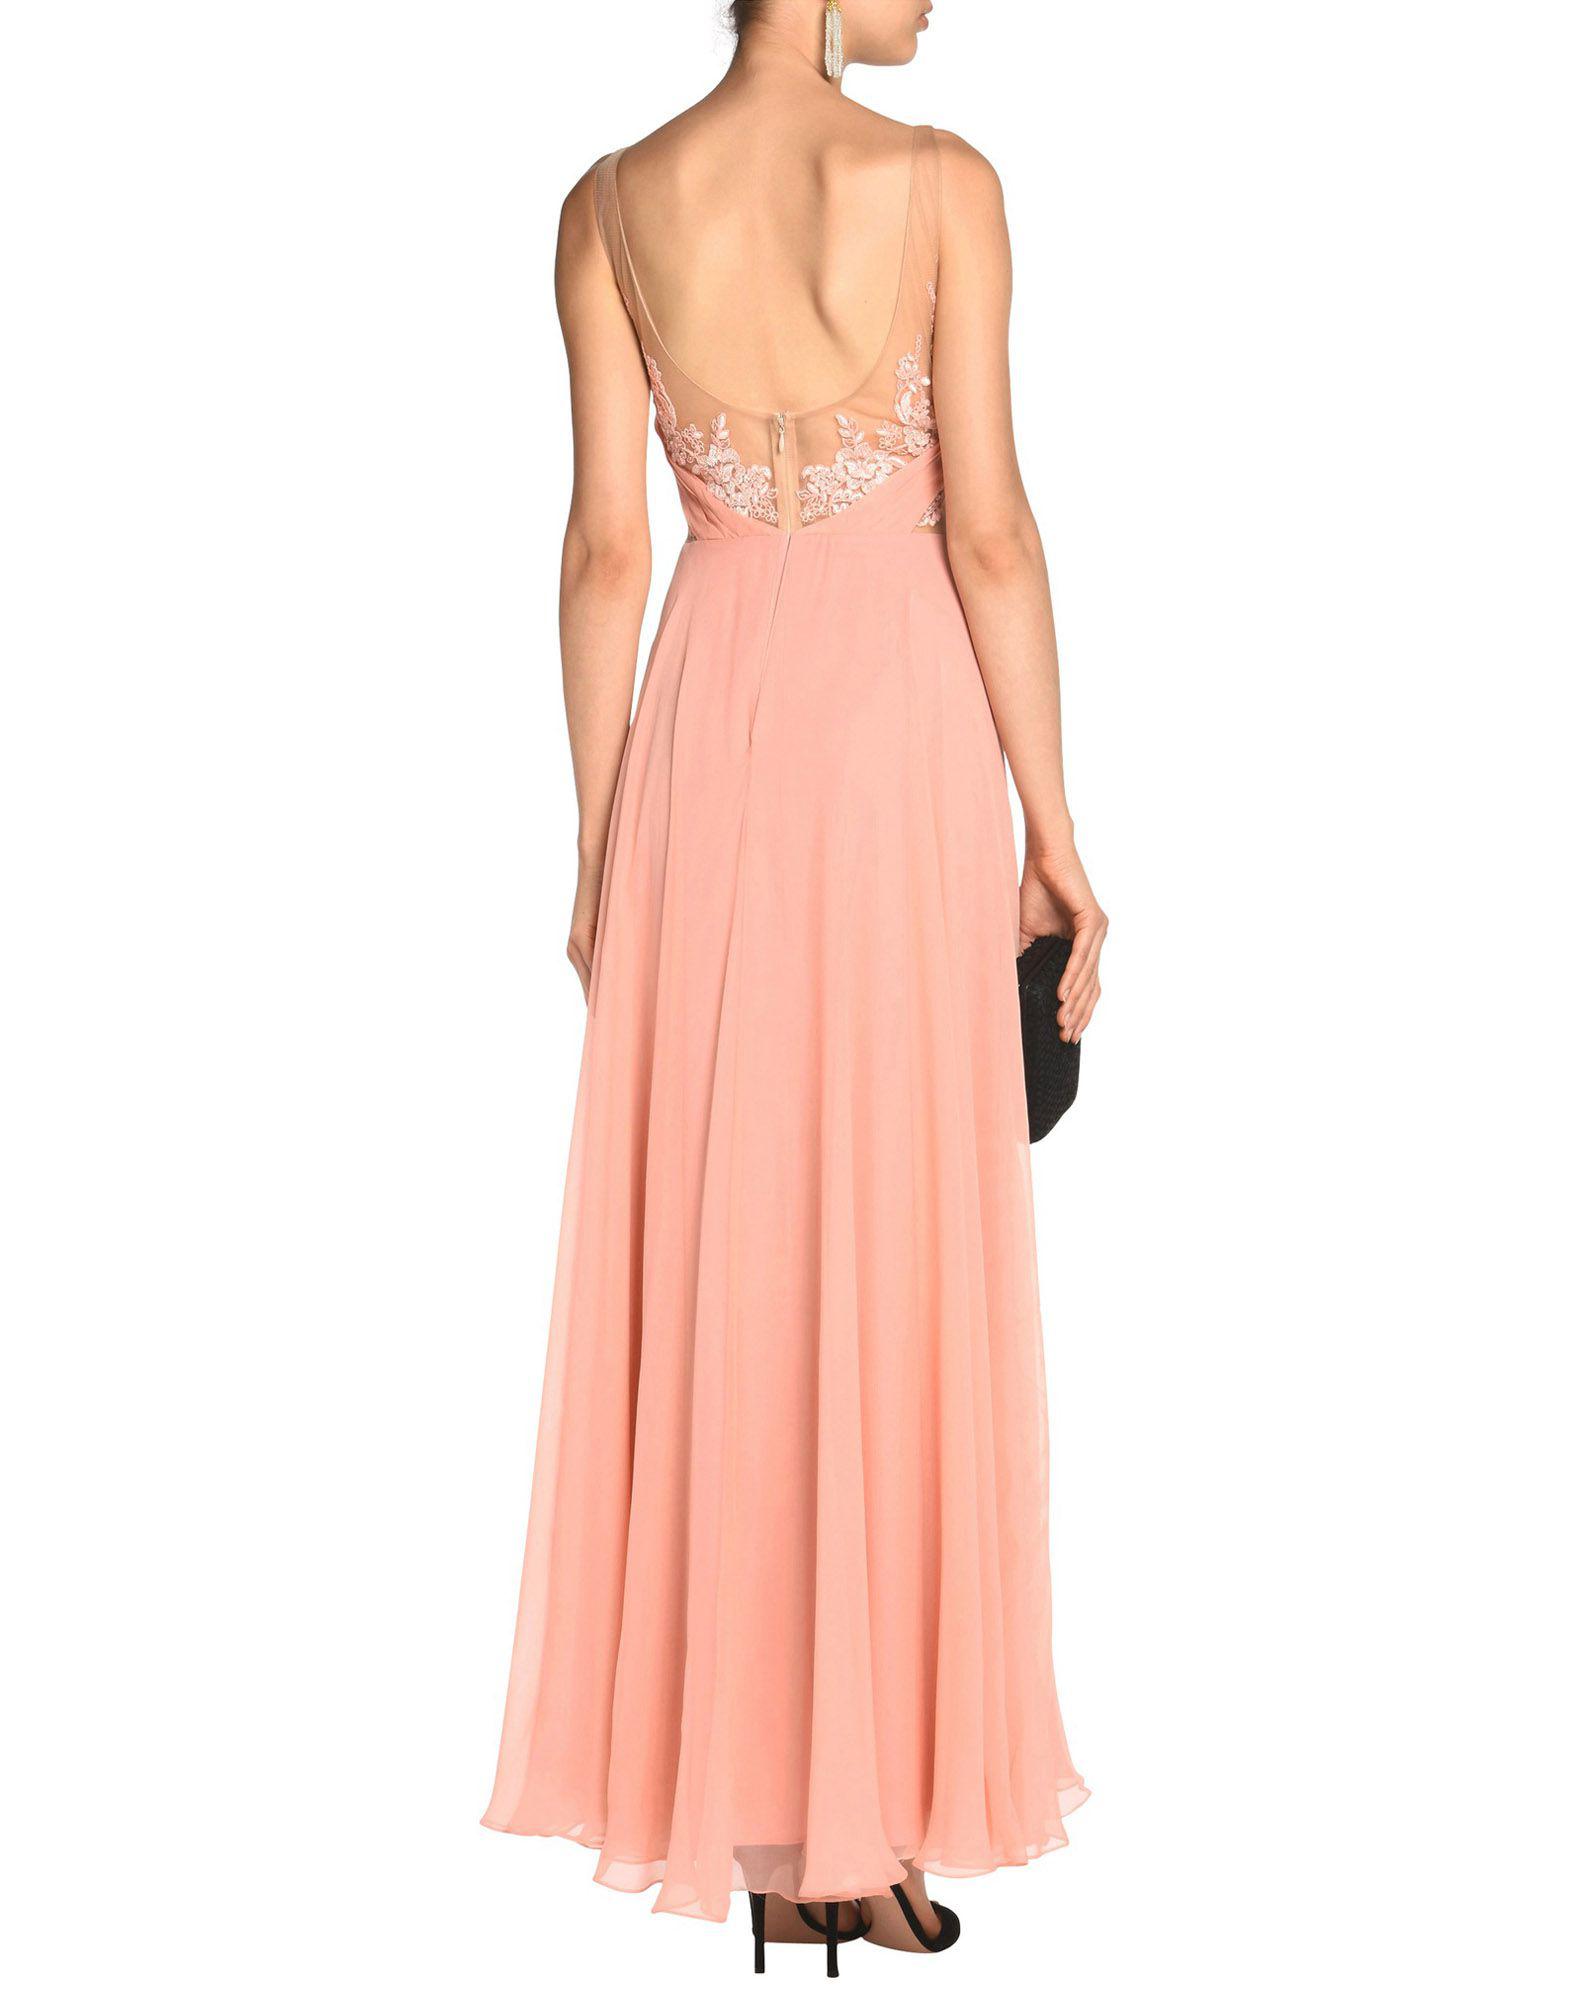 Marchesa notte Tulle Long Dress in Salmon Pink (Pink) - Lyst